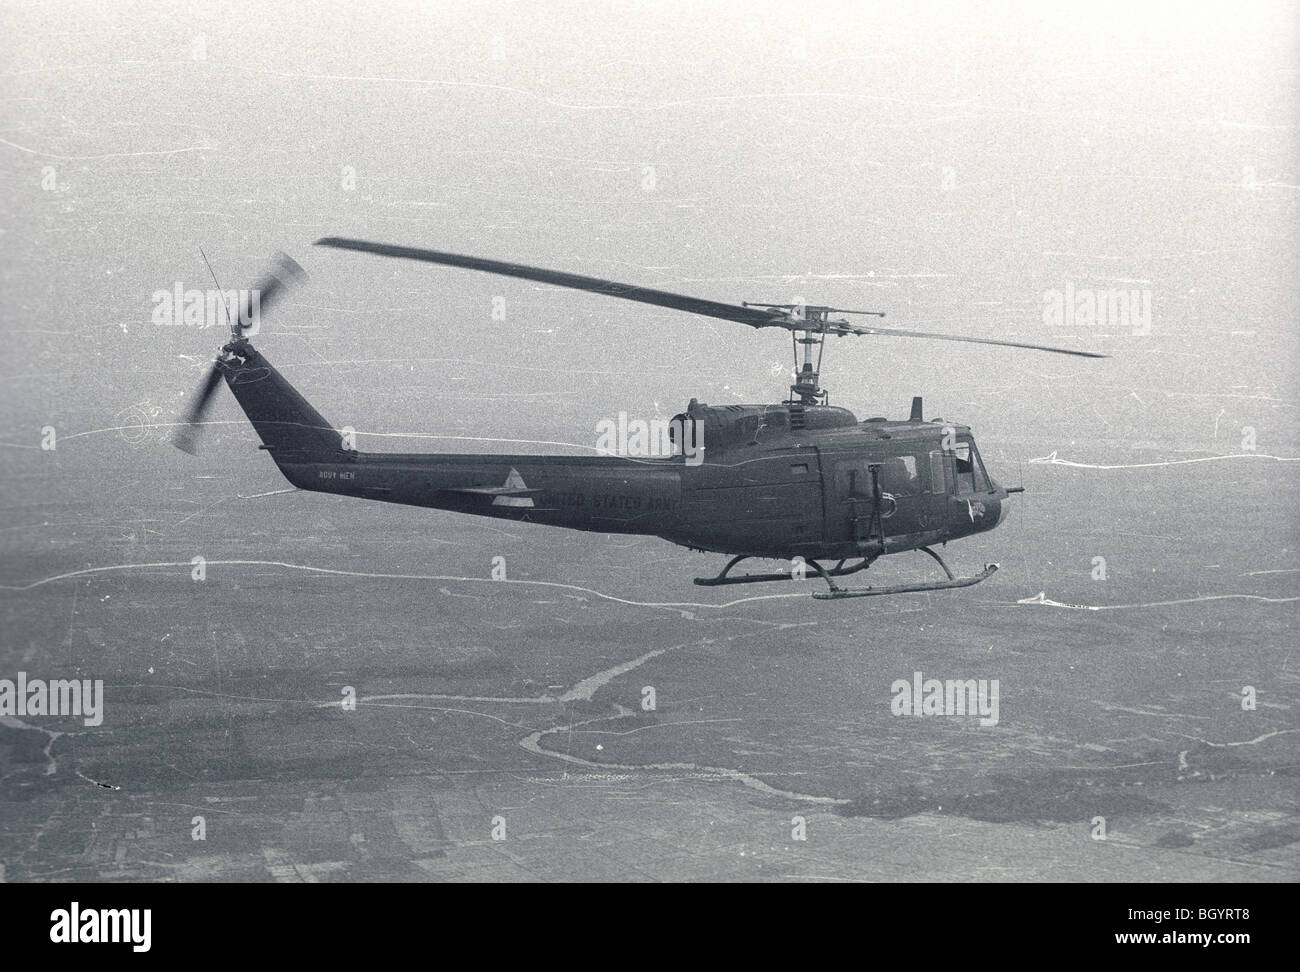 A helicopter of the 121st AHC out of Soc Trang, Vietnam, flies on a mission during the Vietnam War. Stock Photo